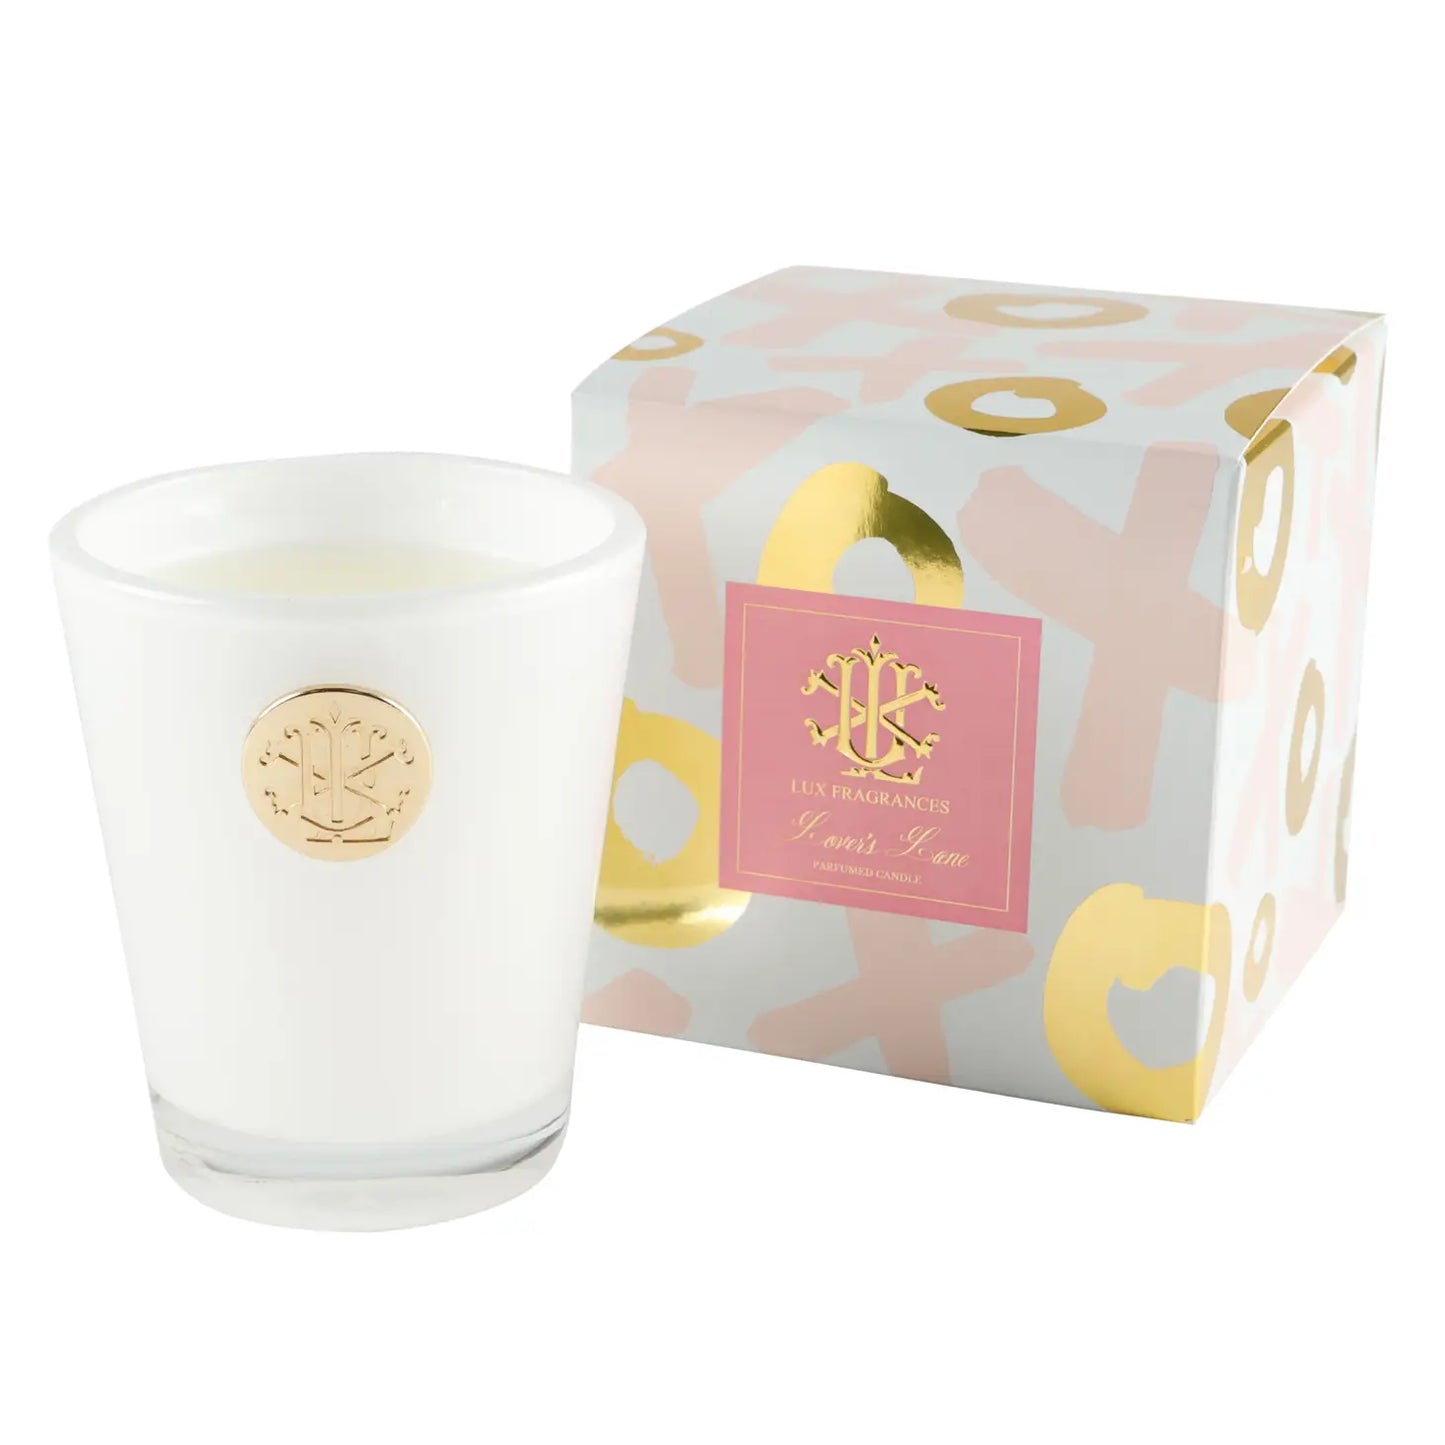 Lux Fragrances Lover's Lane - 8 oz Designer Boxed Candle available at The Good Life Boutique